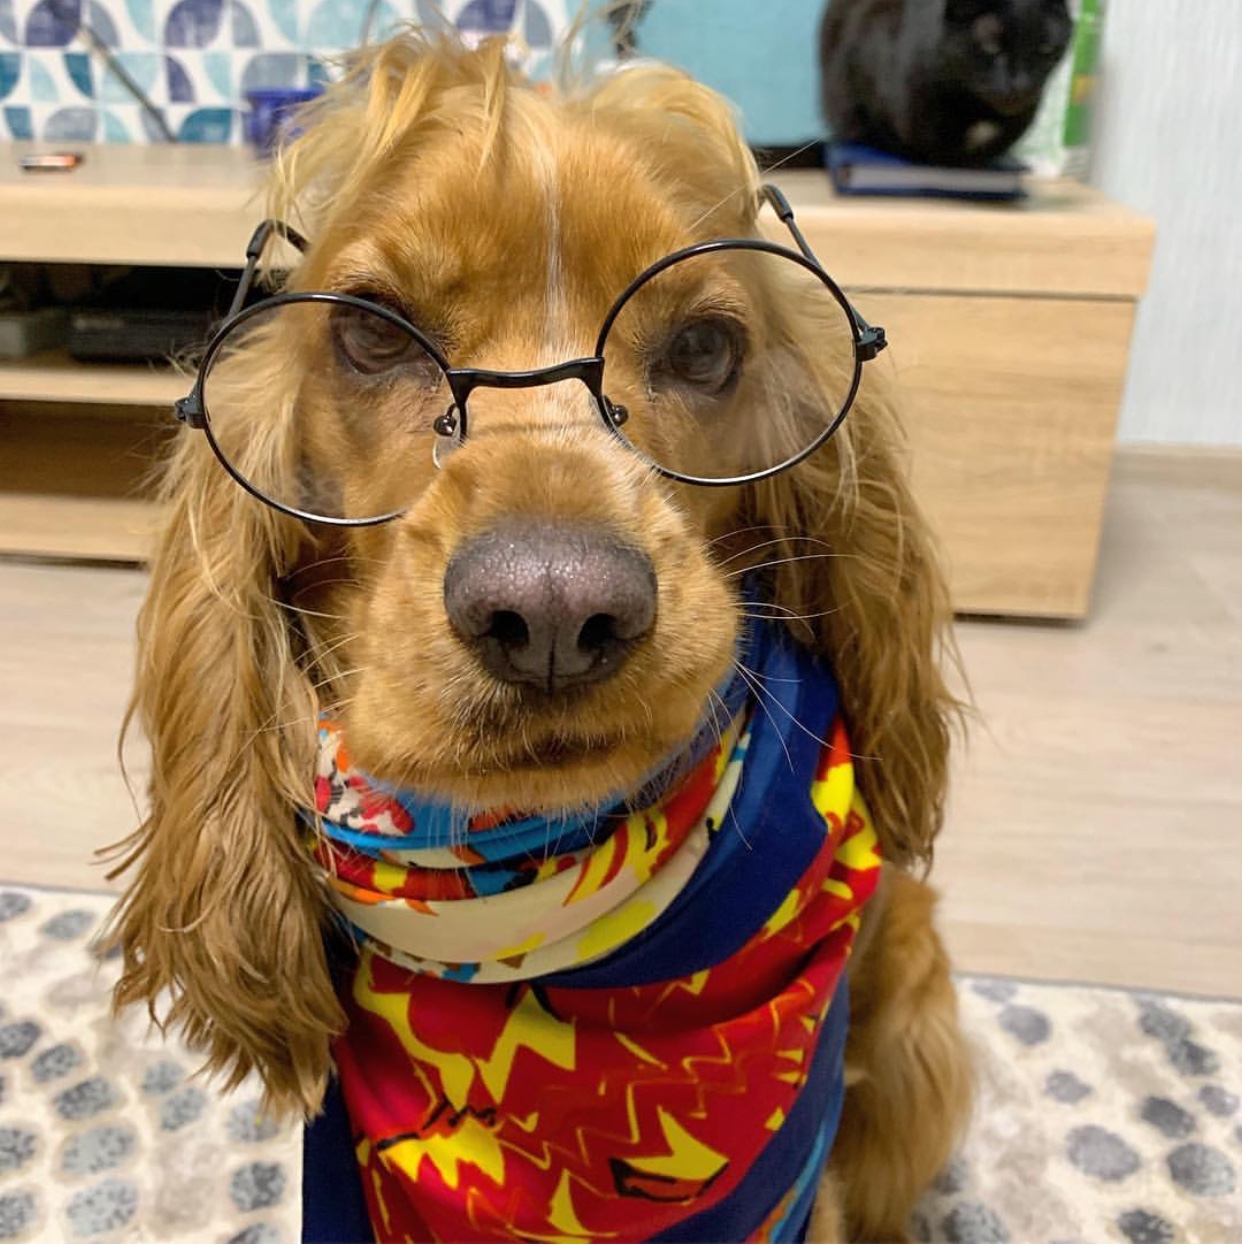 A English Cocker Spaniel wearing glasses while wearing scarf while sitting on the bed